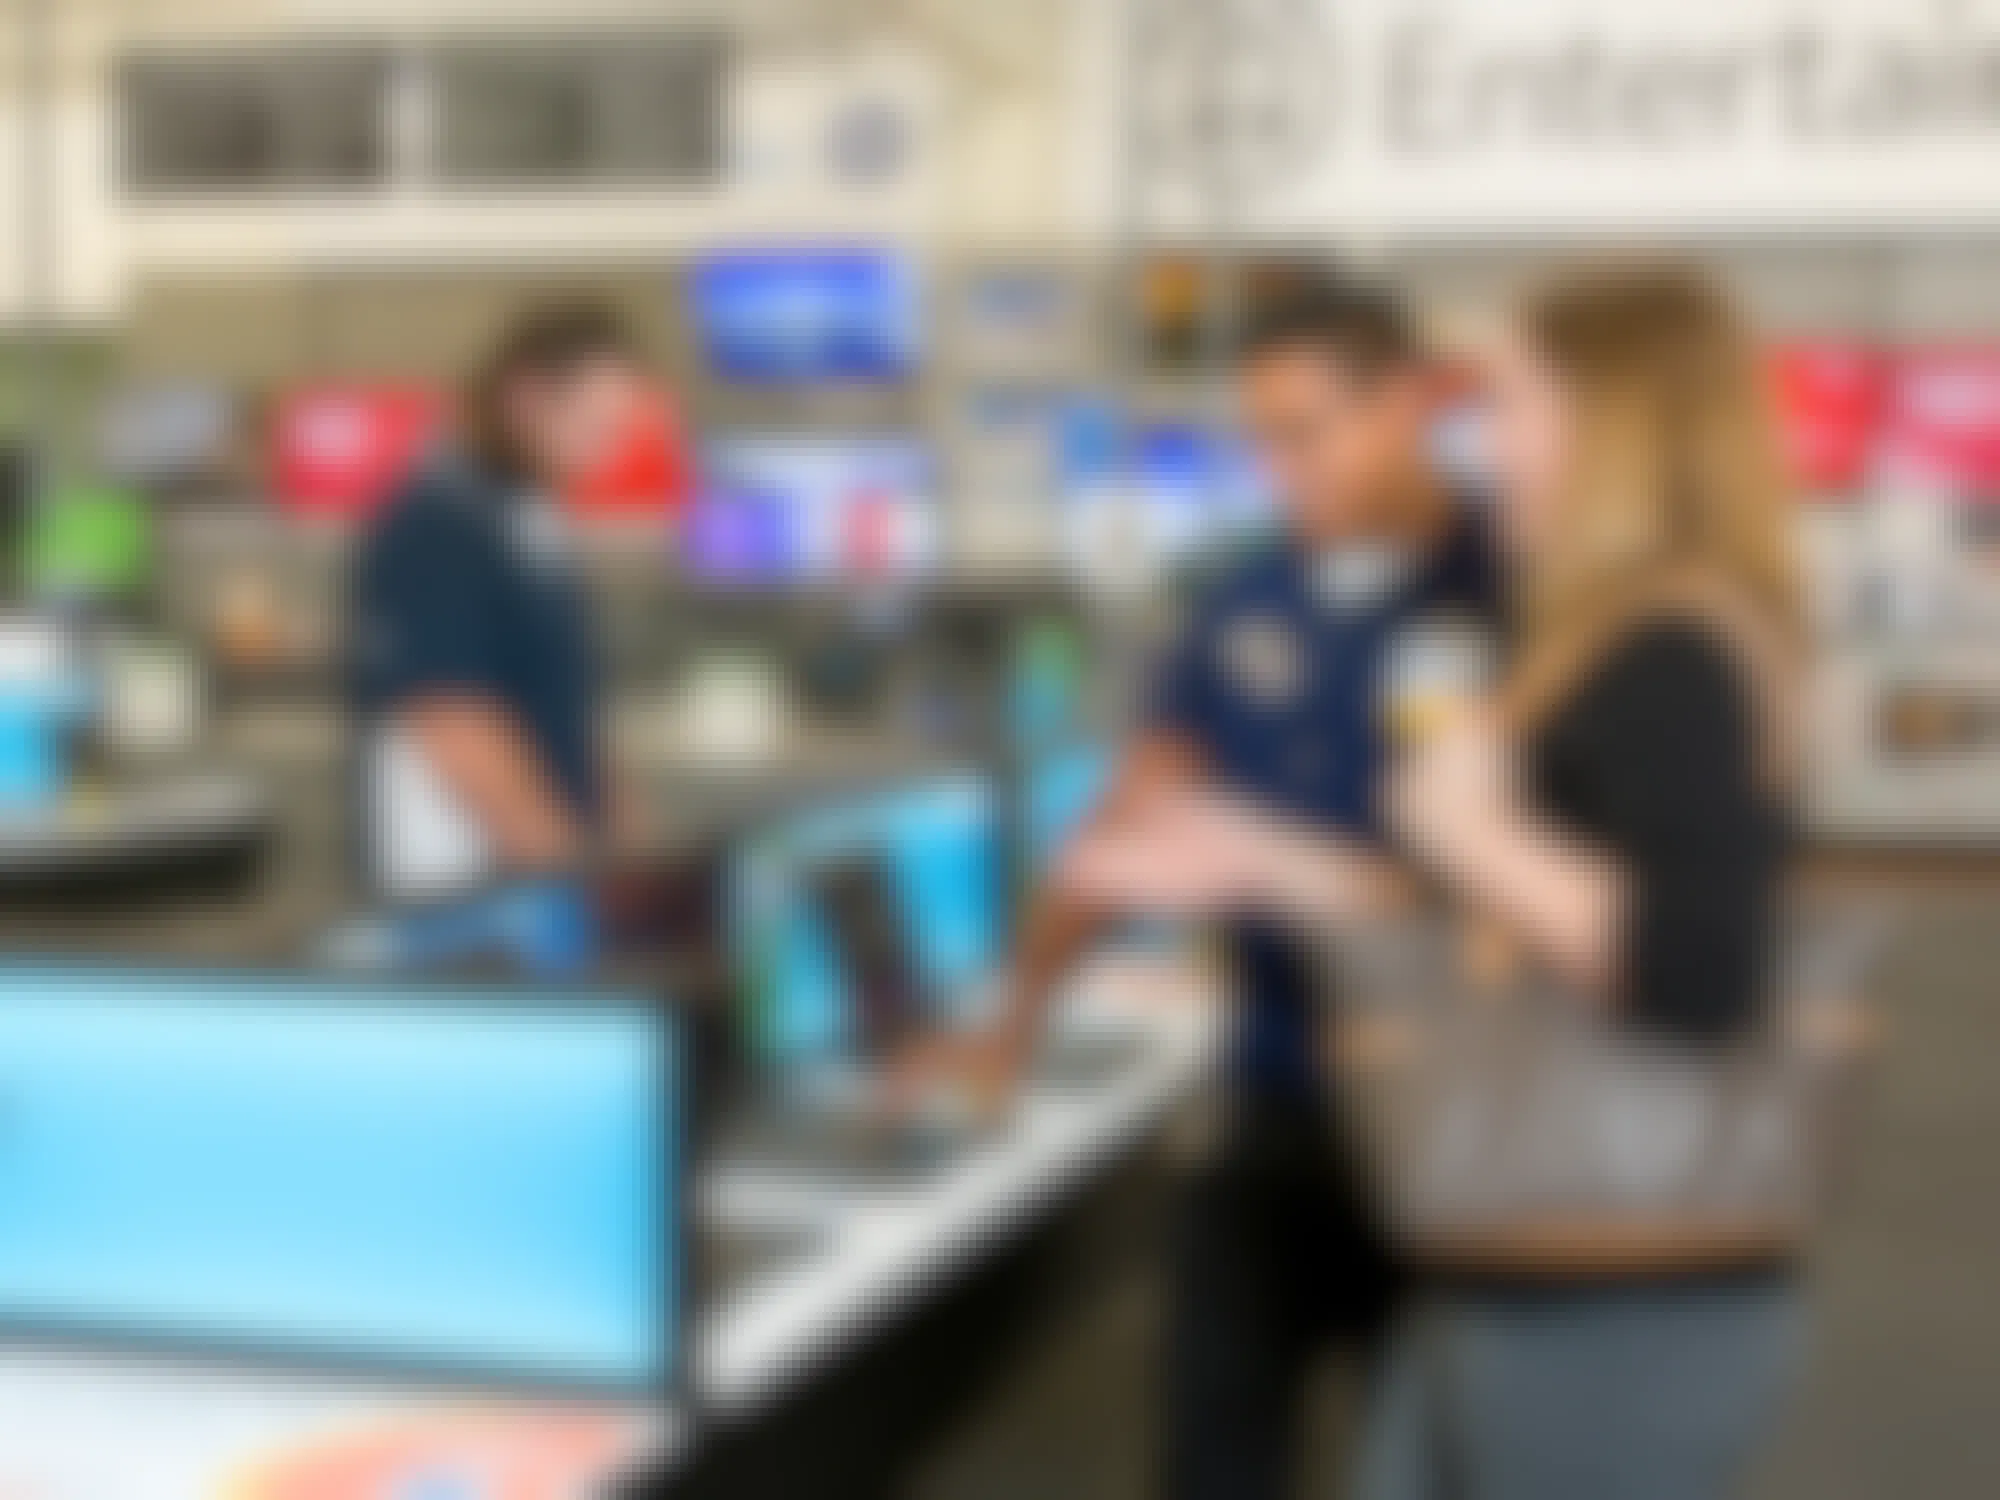 A Walmart employee talking to a customer in the electronics department